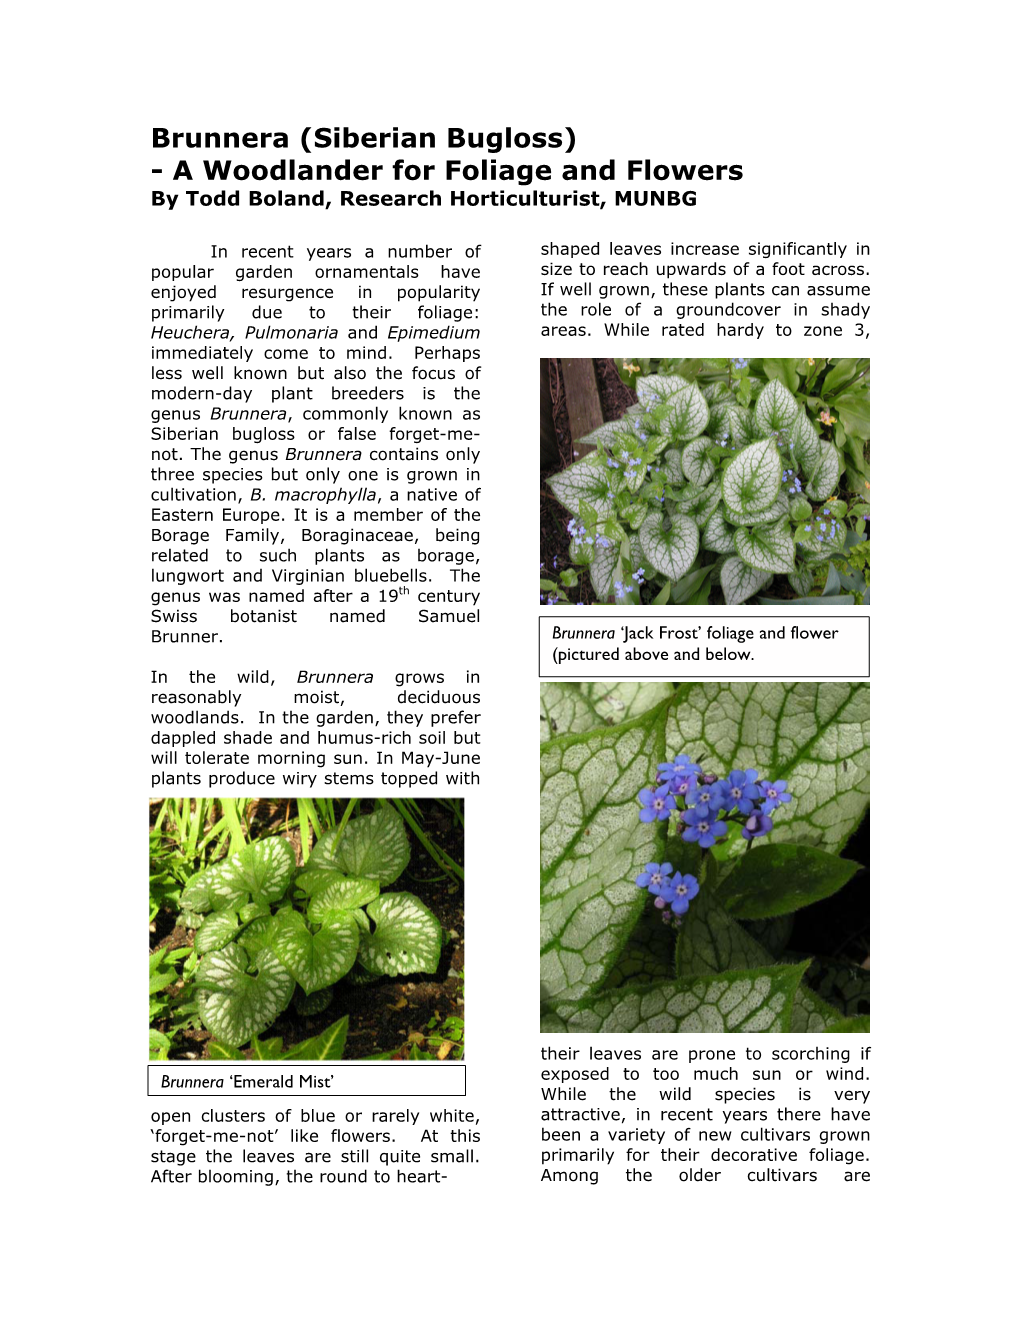 Brunnera (Siberian Bugloss) - a Woodlander for Foliage and Flowers by Todd Boland, Research Horticulturist, MUNBG